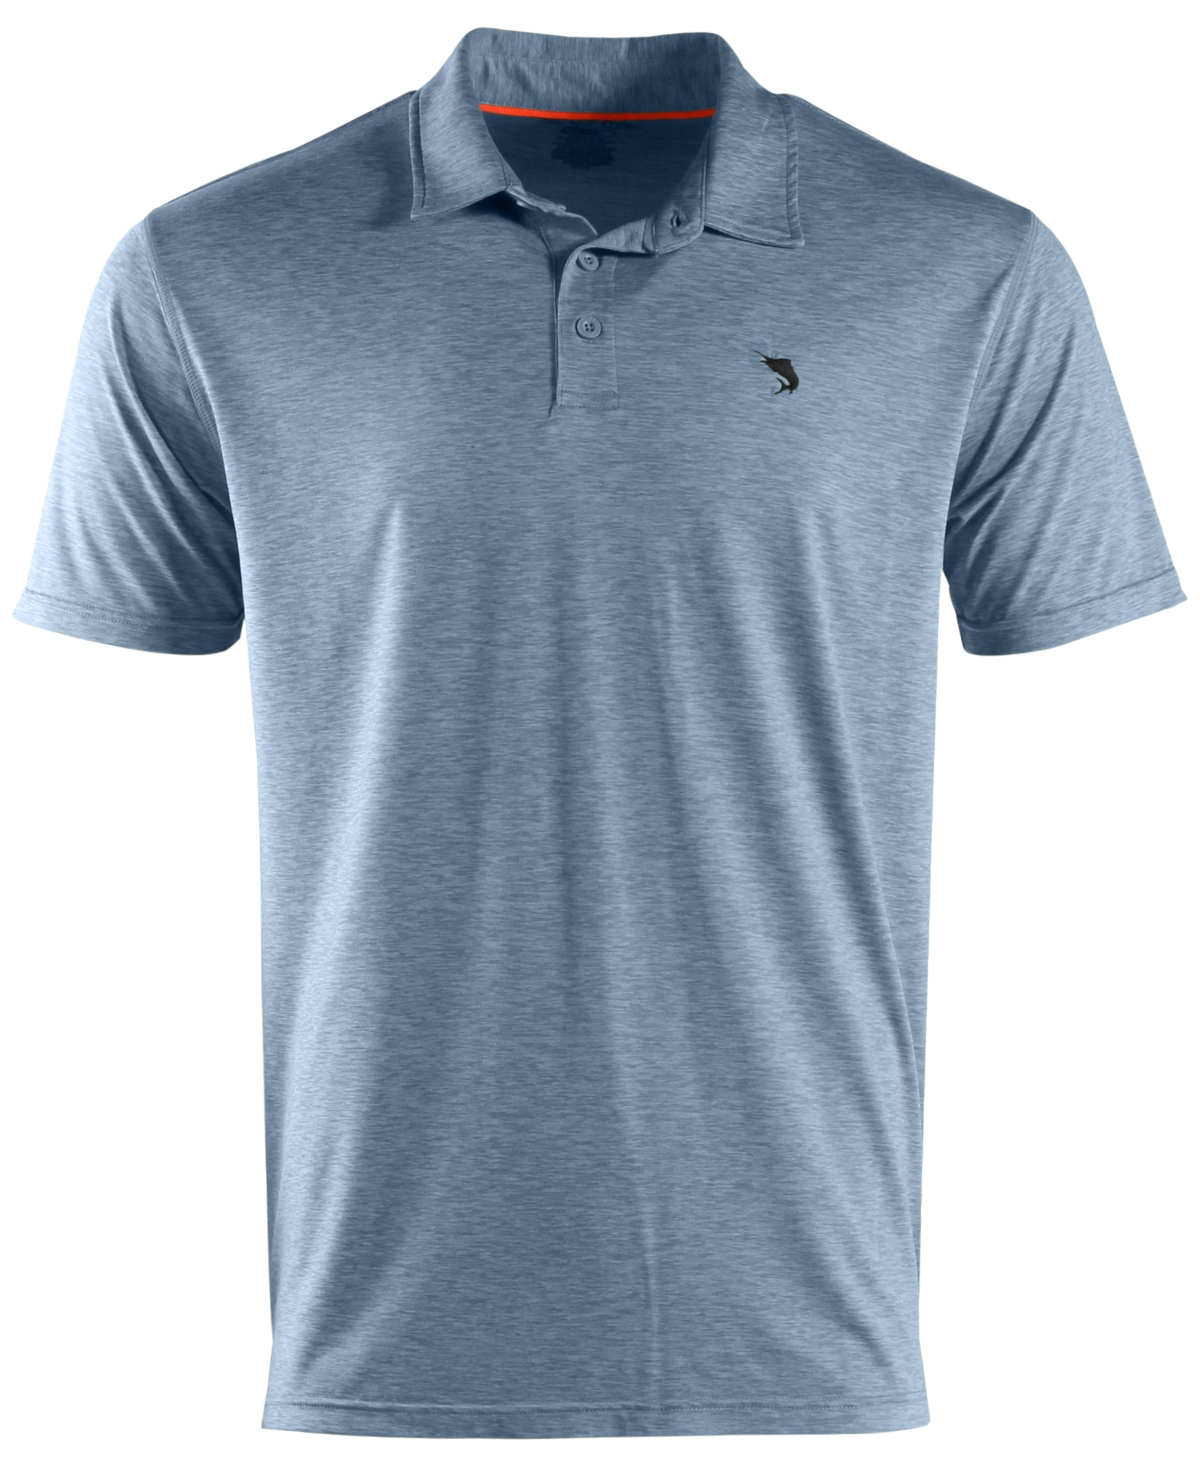 Salt Life Outrigger Performance Polo Shirt In Athletic Heather